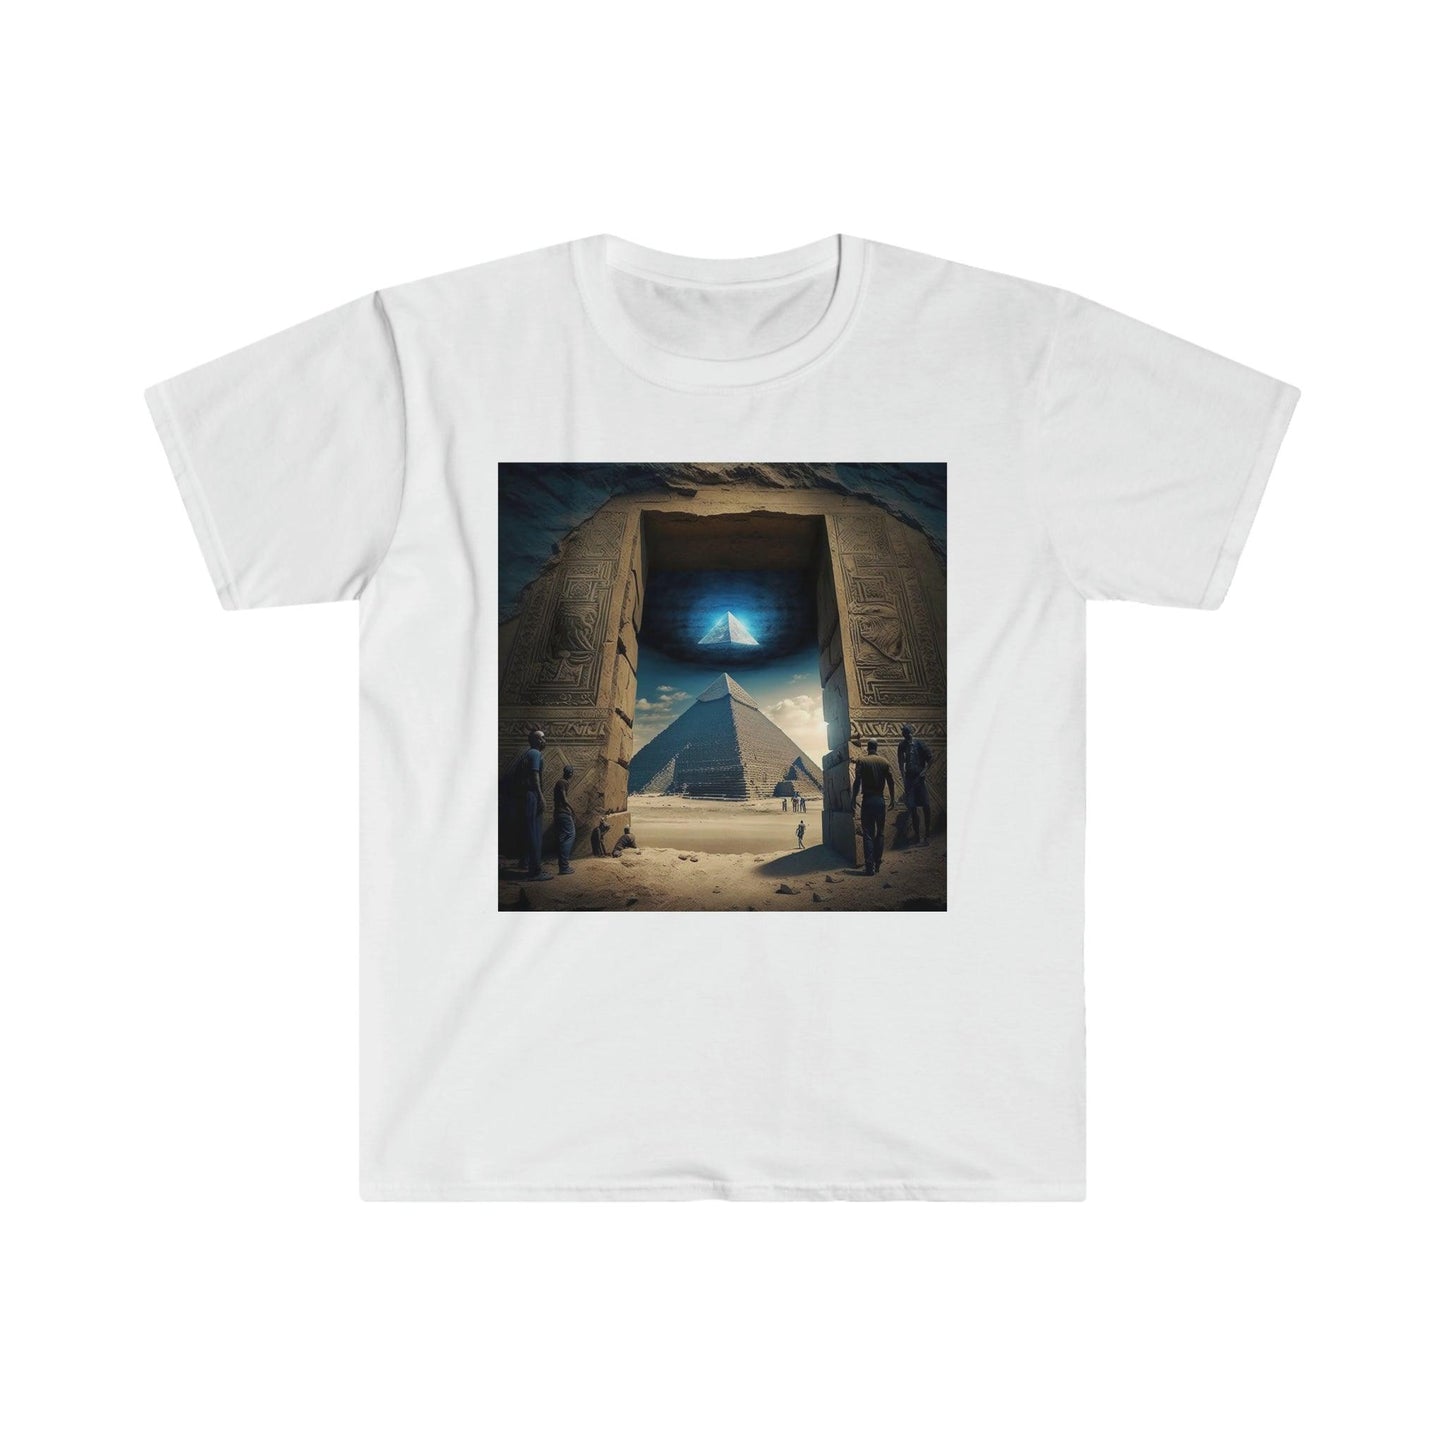 Cosmic Witnesses: Psychedelic Ai Art Men's and Women's Unisex T-Shirt for Festival and Street Wear Pyramids v6.1 - Alchemystics.org